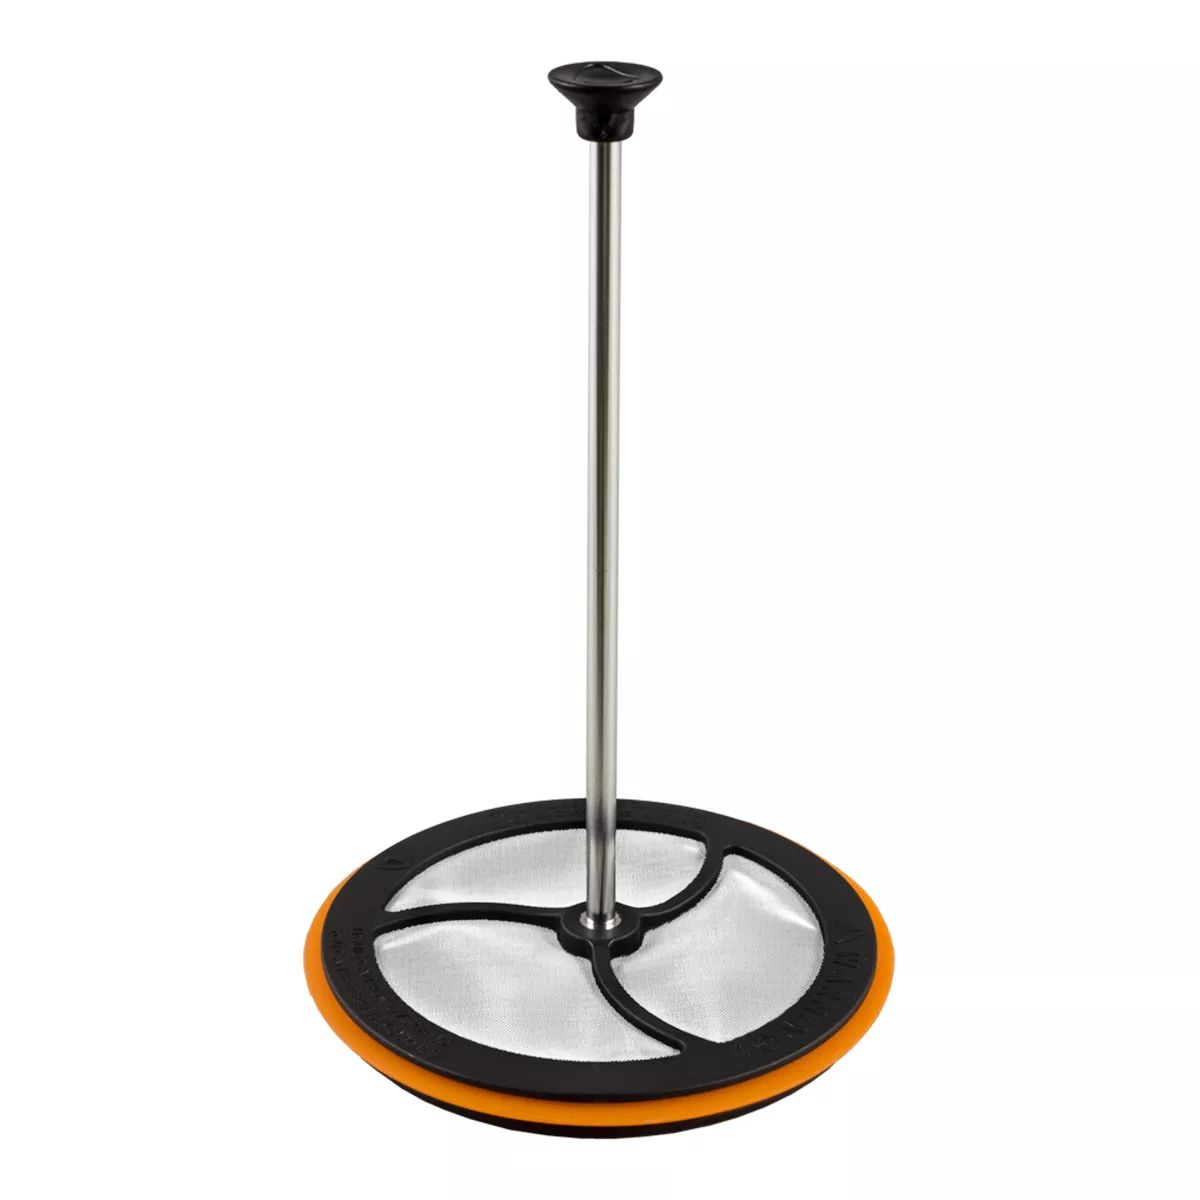 Image of Jetboil Coffee Press Accessories